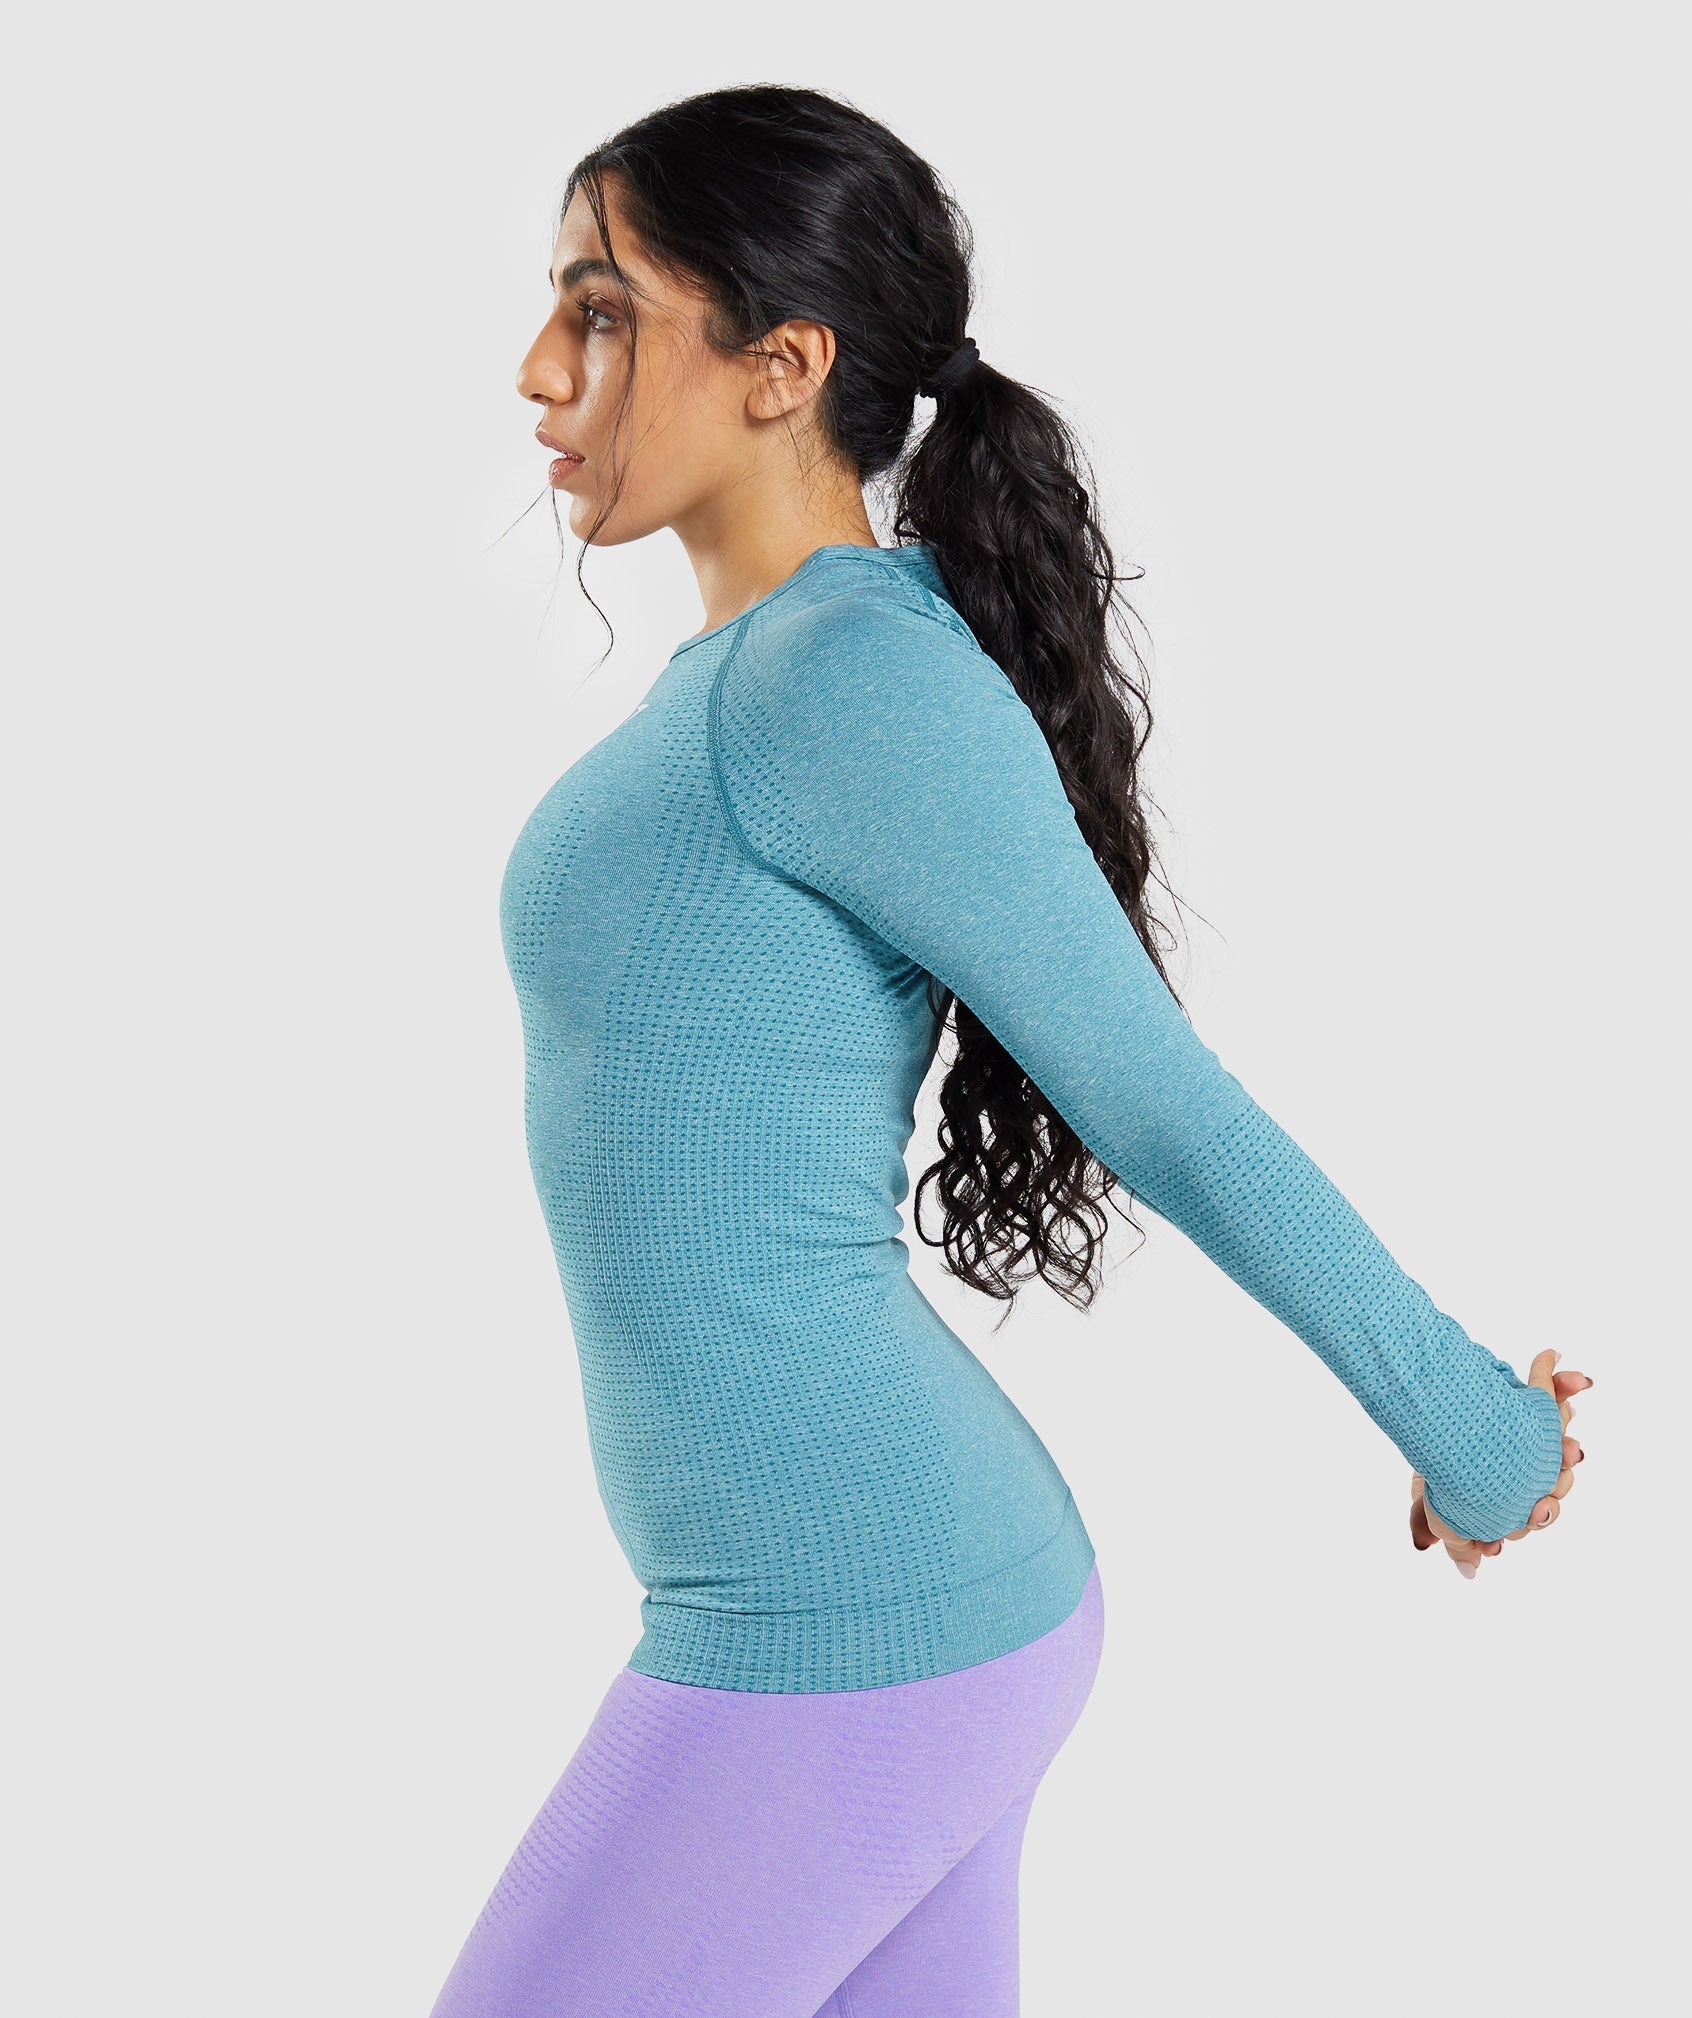 Be Winter Ready With The New Gymshark VITAL SEAMLESS 2.0 LONG SLEEVE TOP -  Gymfluencers